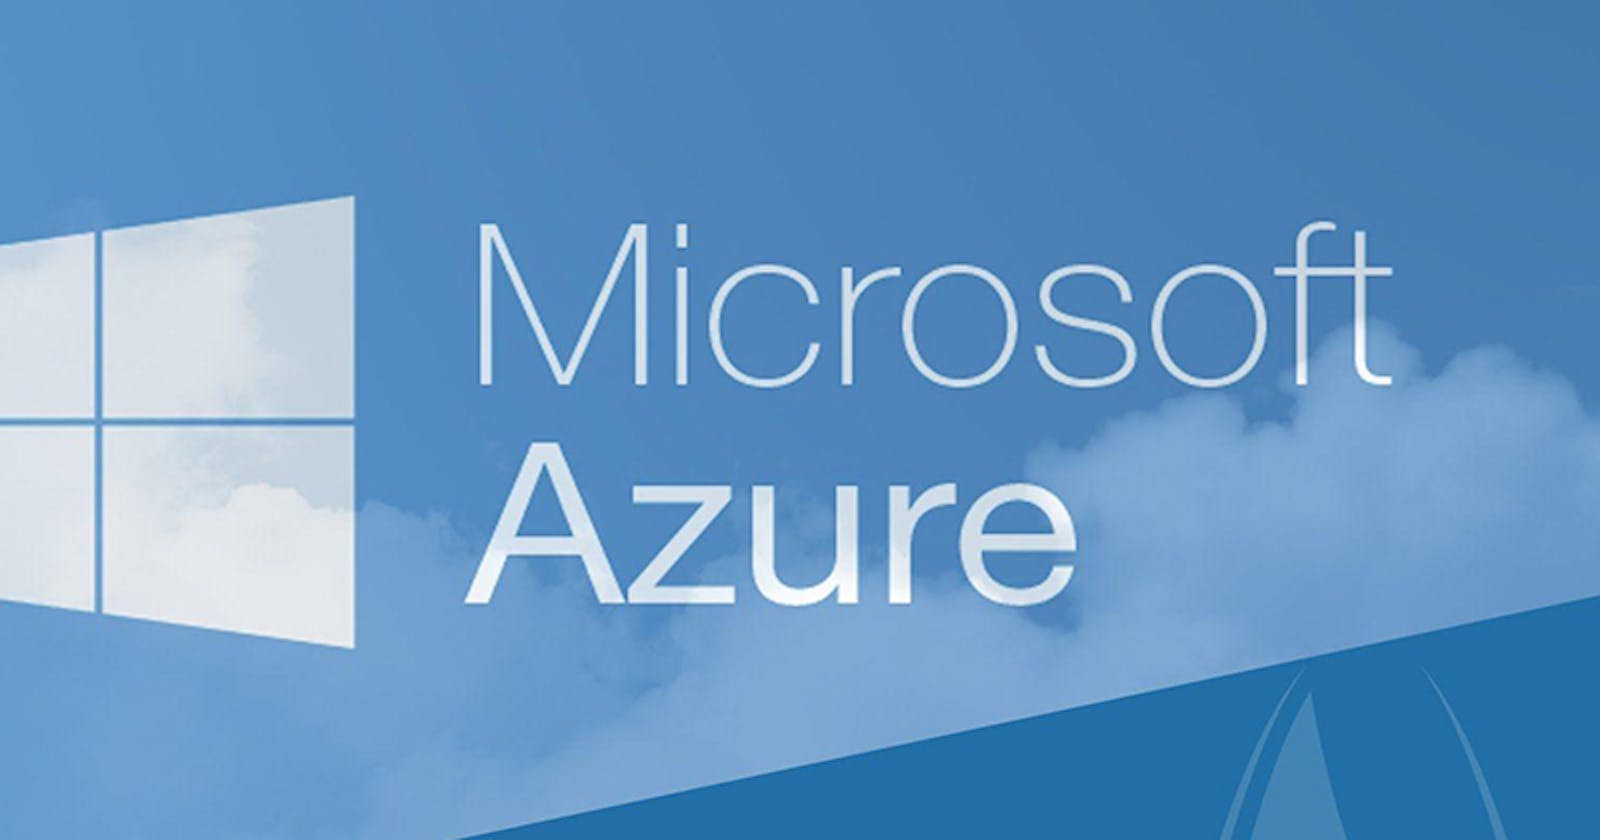 All about Azure